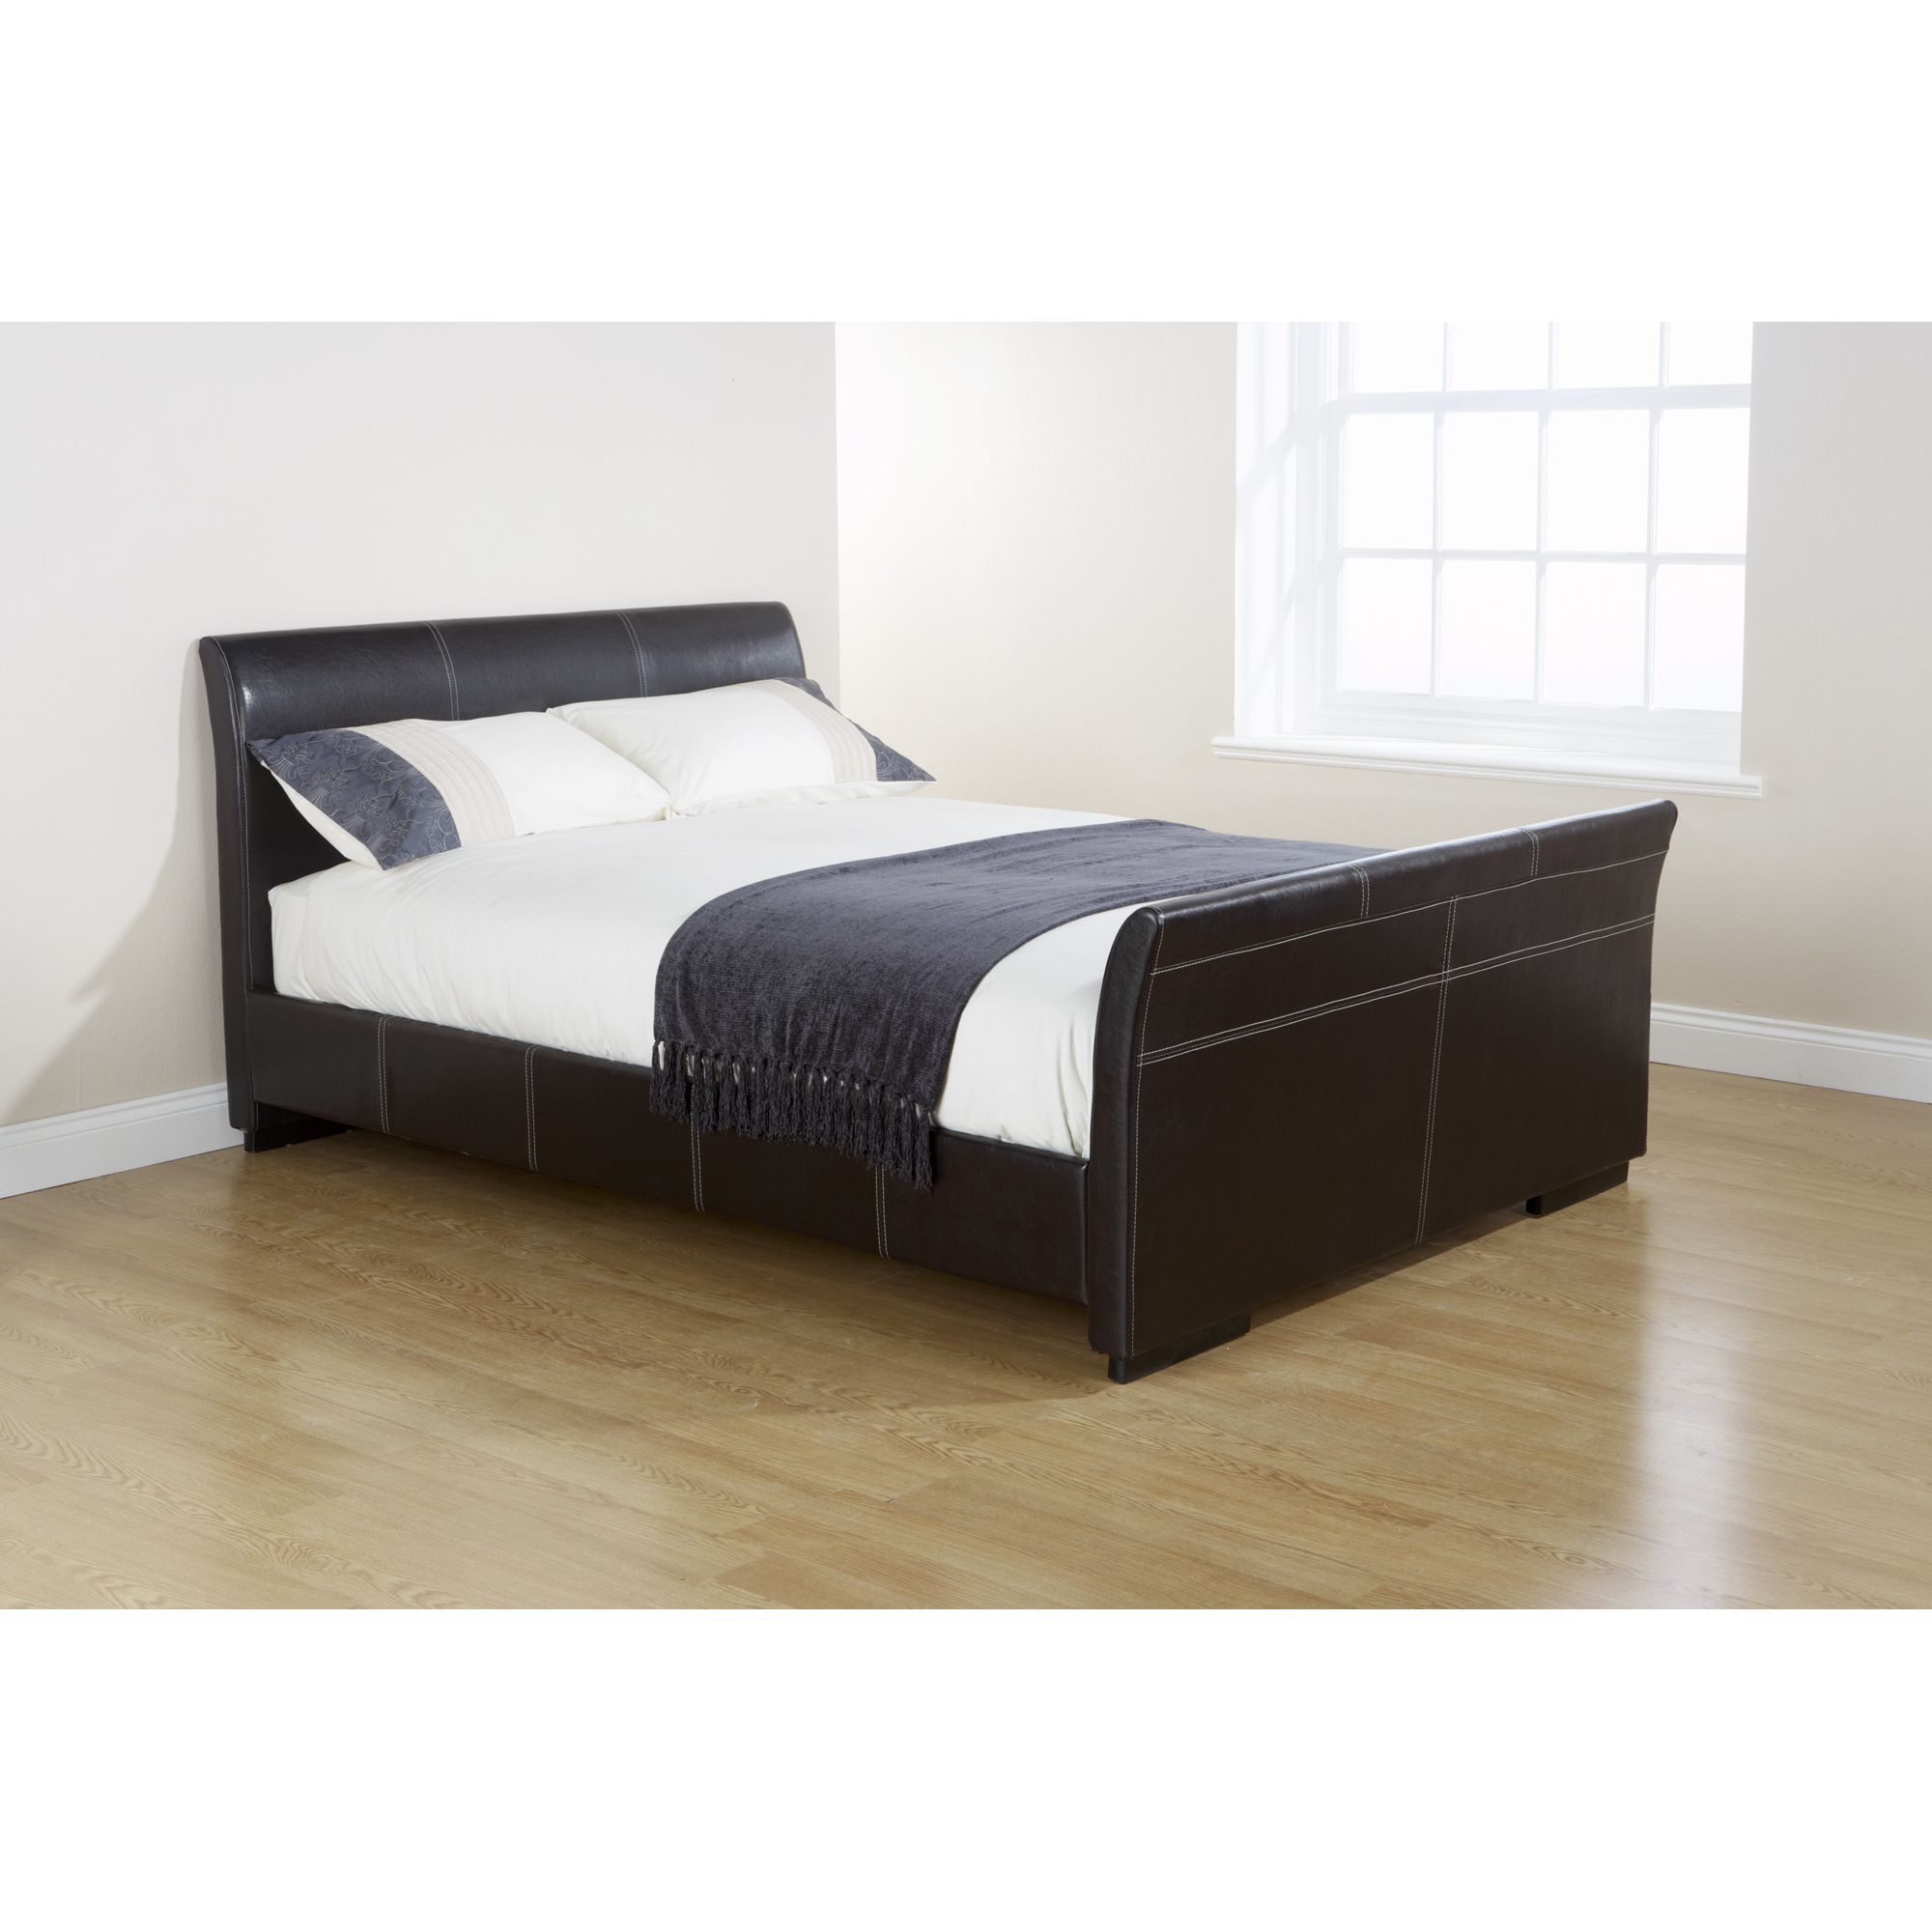 Elements York Sleigh Bed - King at Tescos Direct